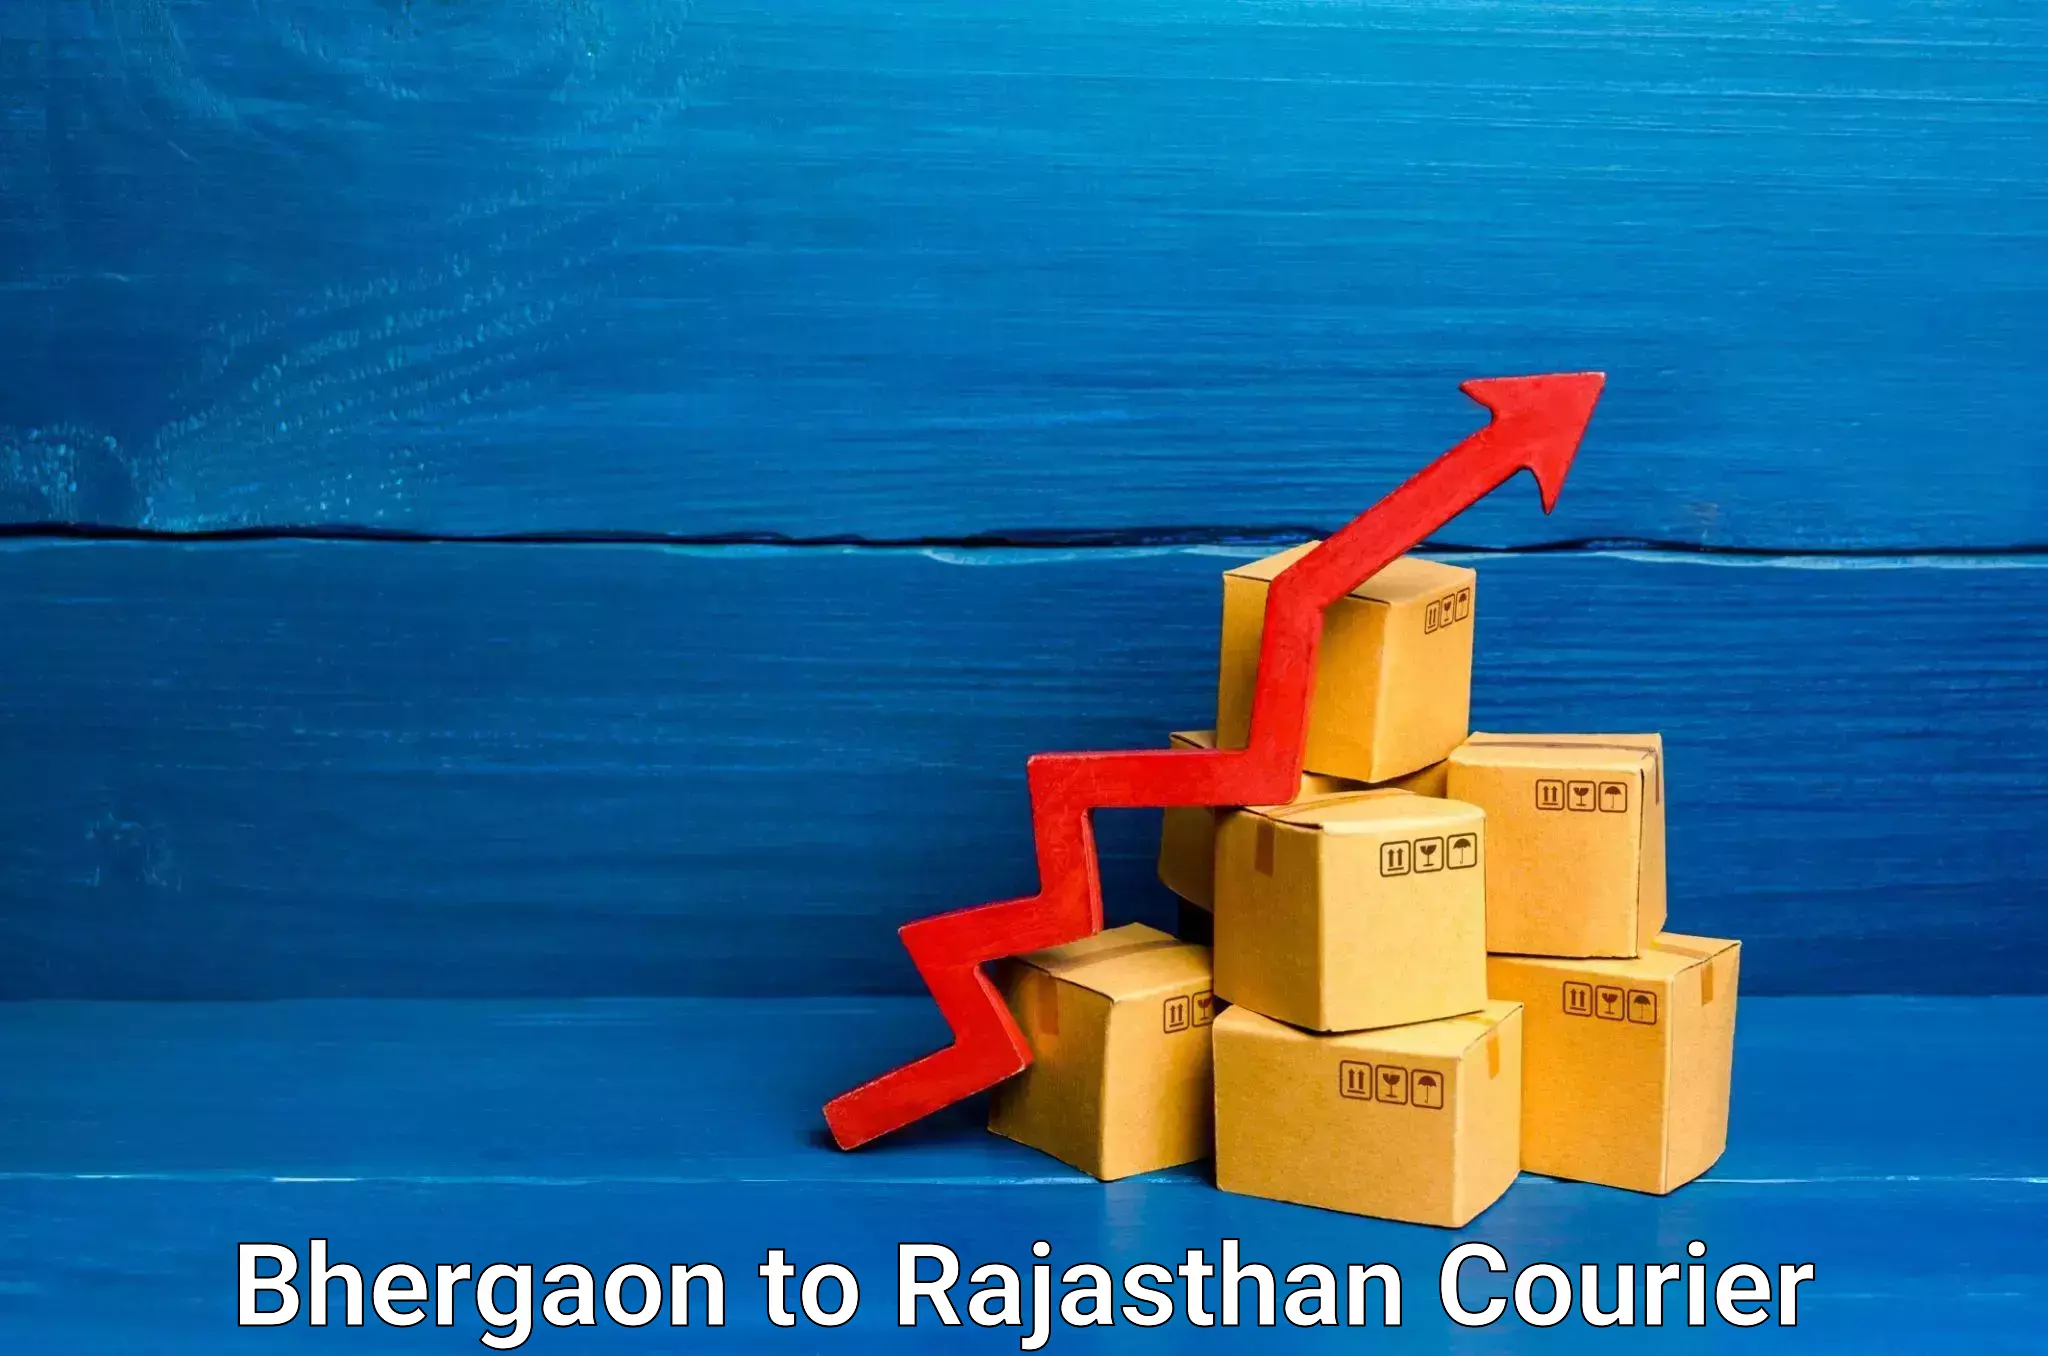 Comprehensive shipping network Bhergaon to Rajasthan